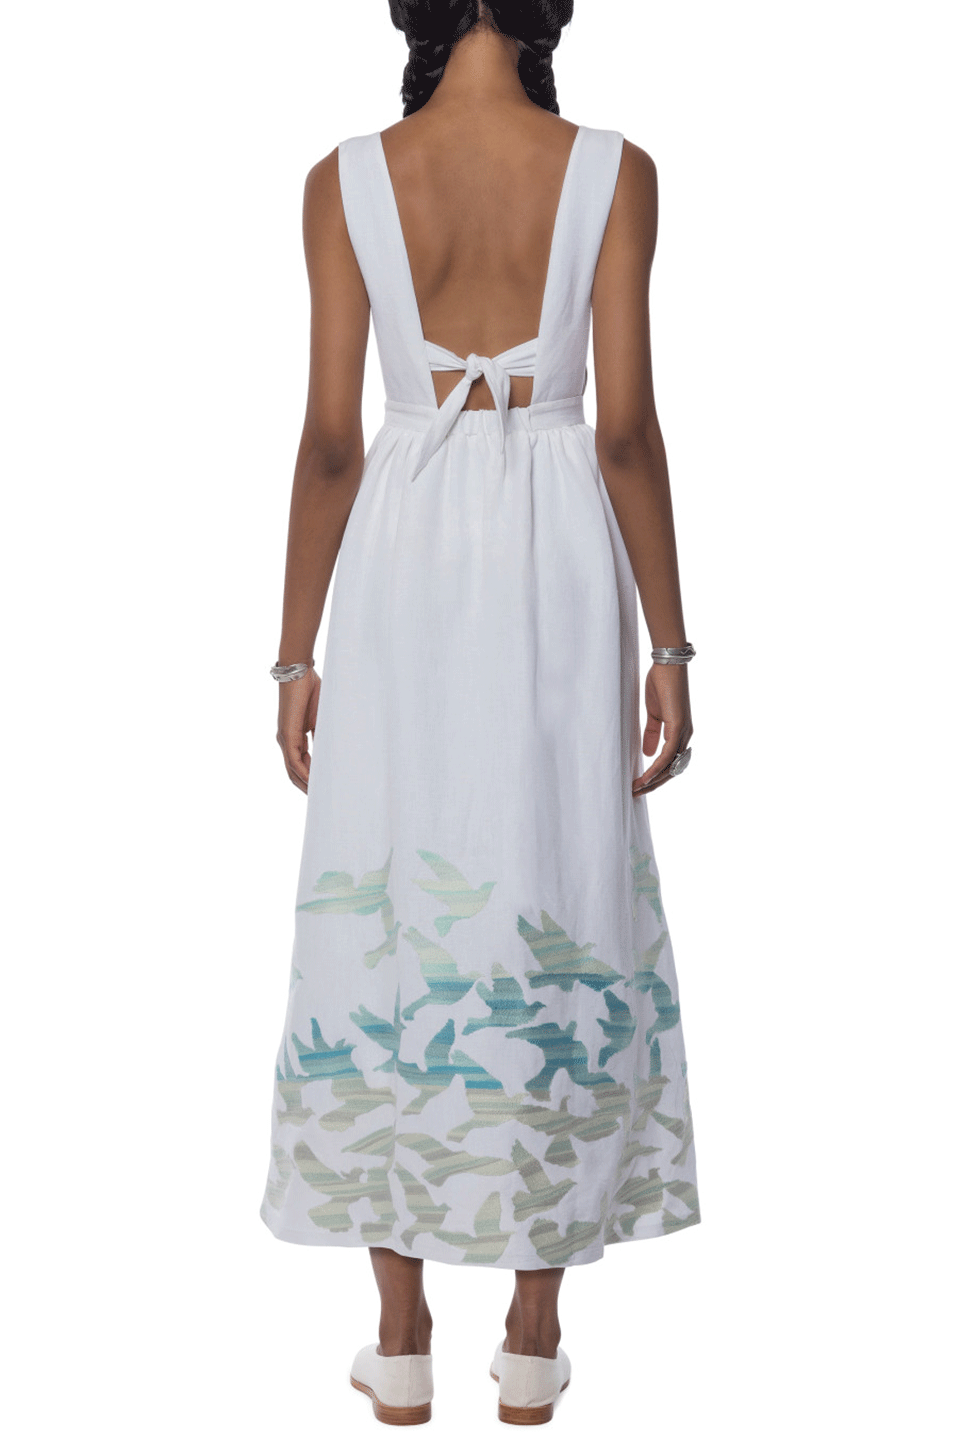 MARA HOFFMAN-Embroidered Tie Back Dress-WHITE